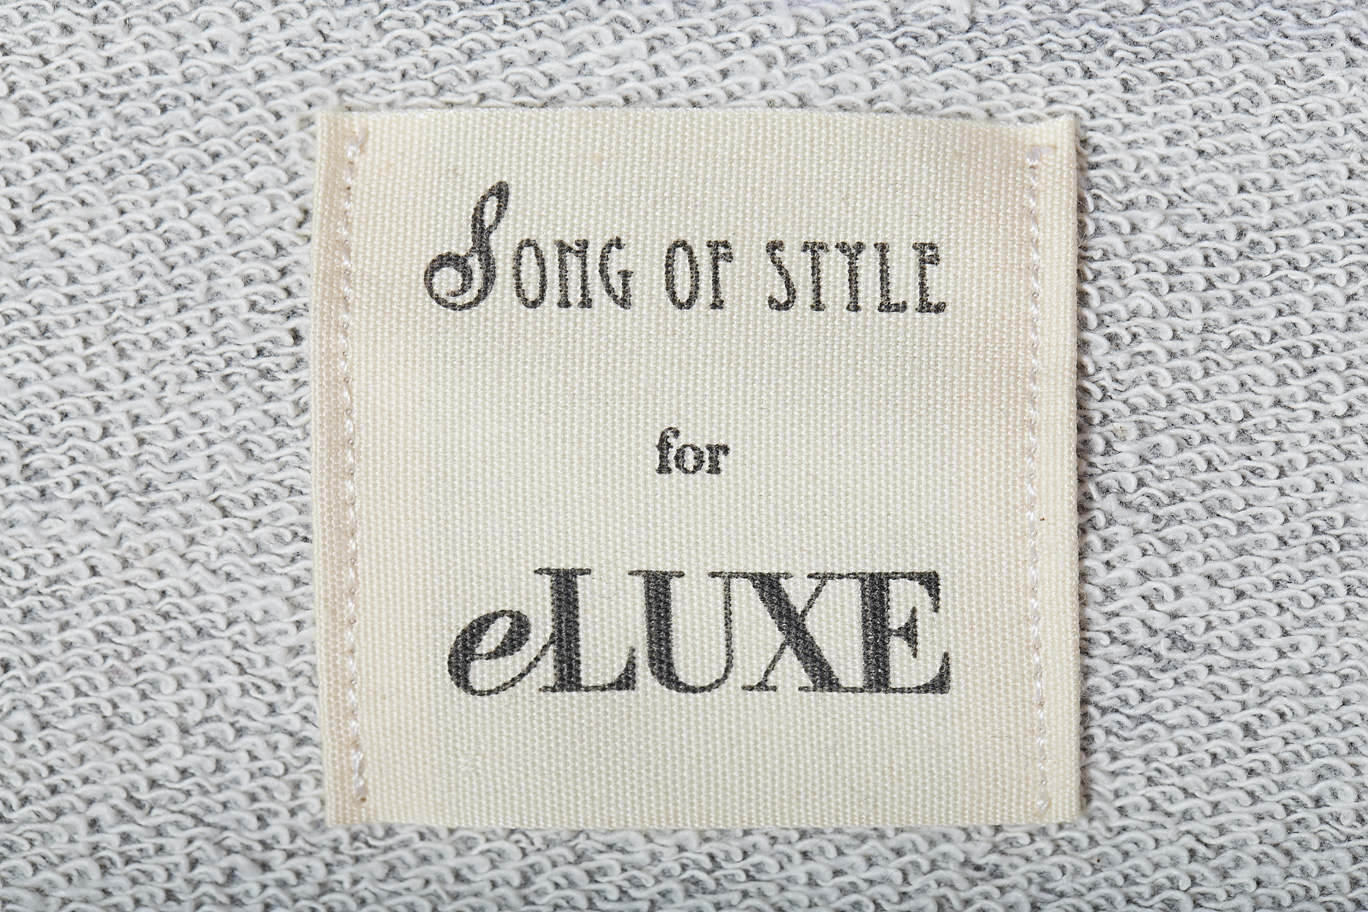 Song of style for eluxe